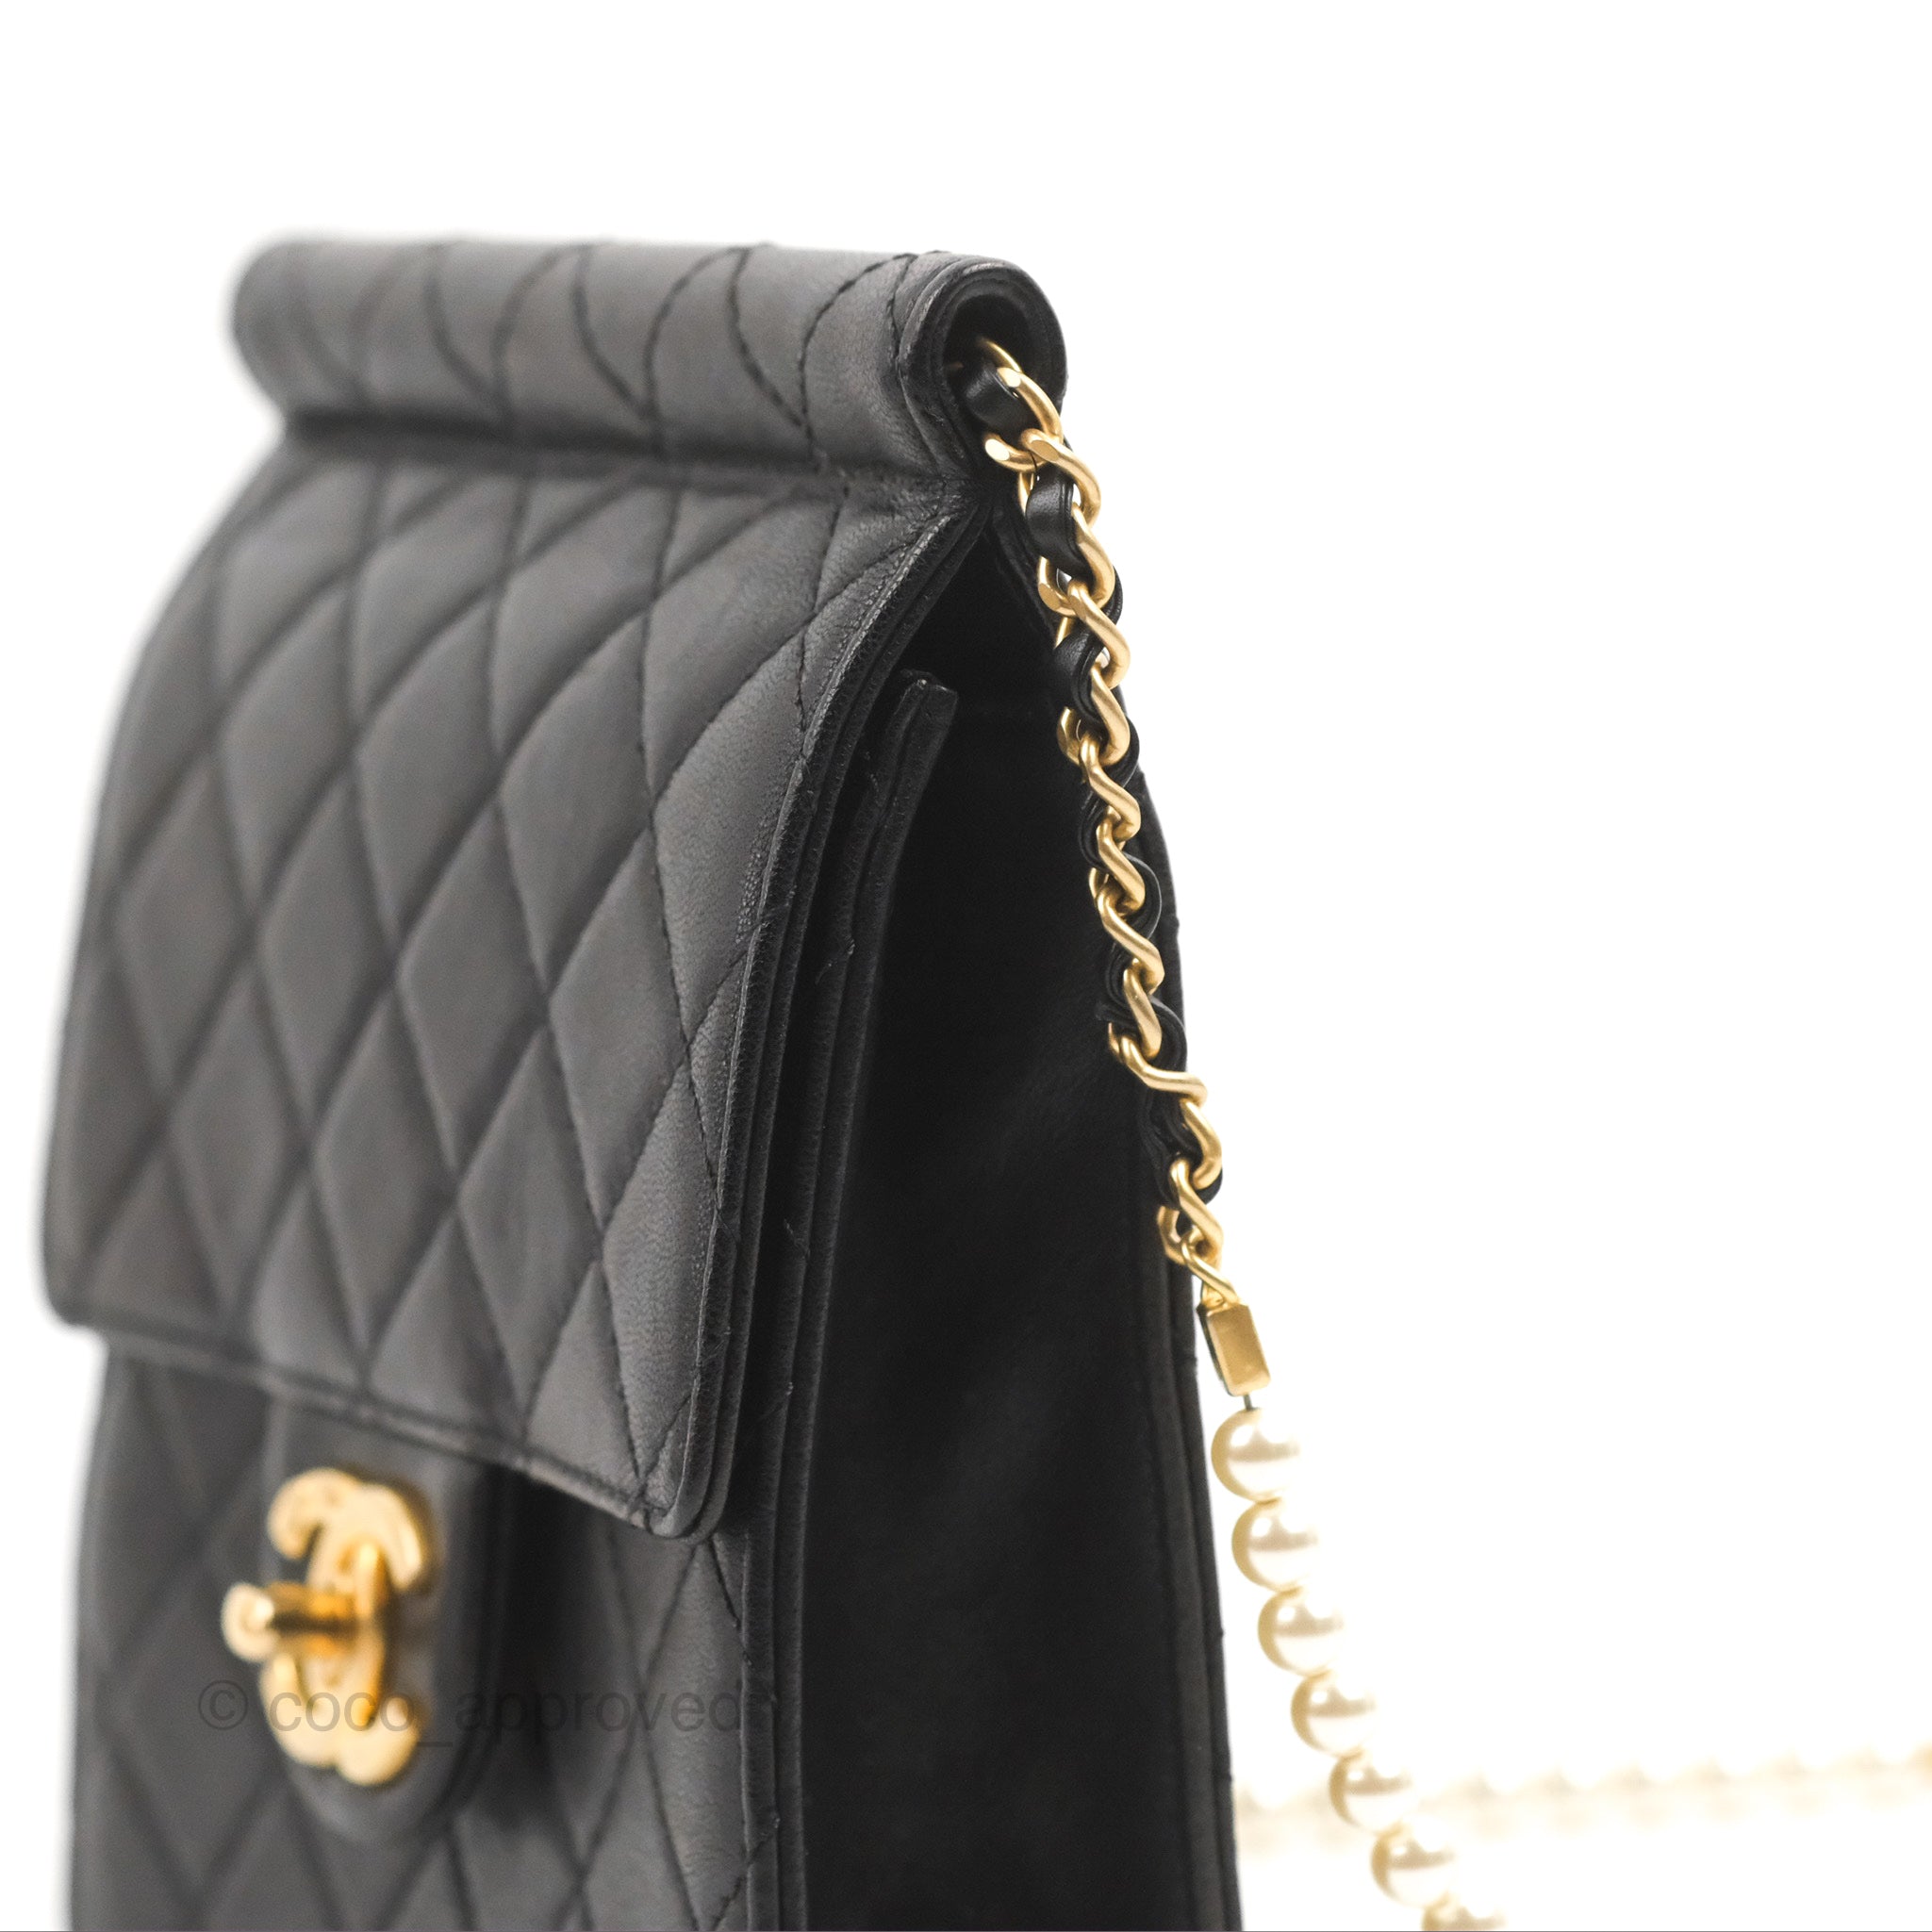 Chanel Small Pearl Flap Bag Black Calfskin Aged Gold Hardware – Coco  Approved Studio